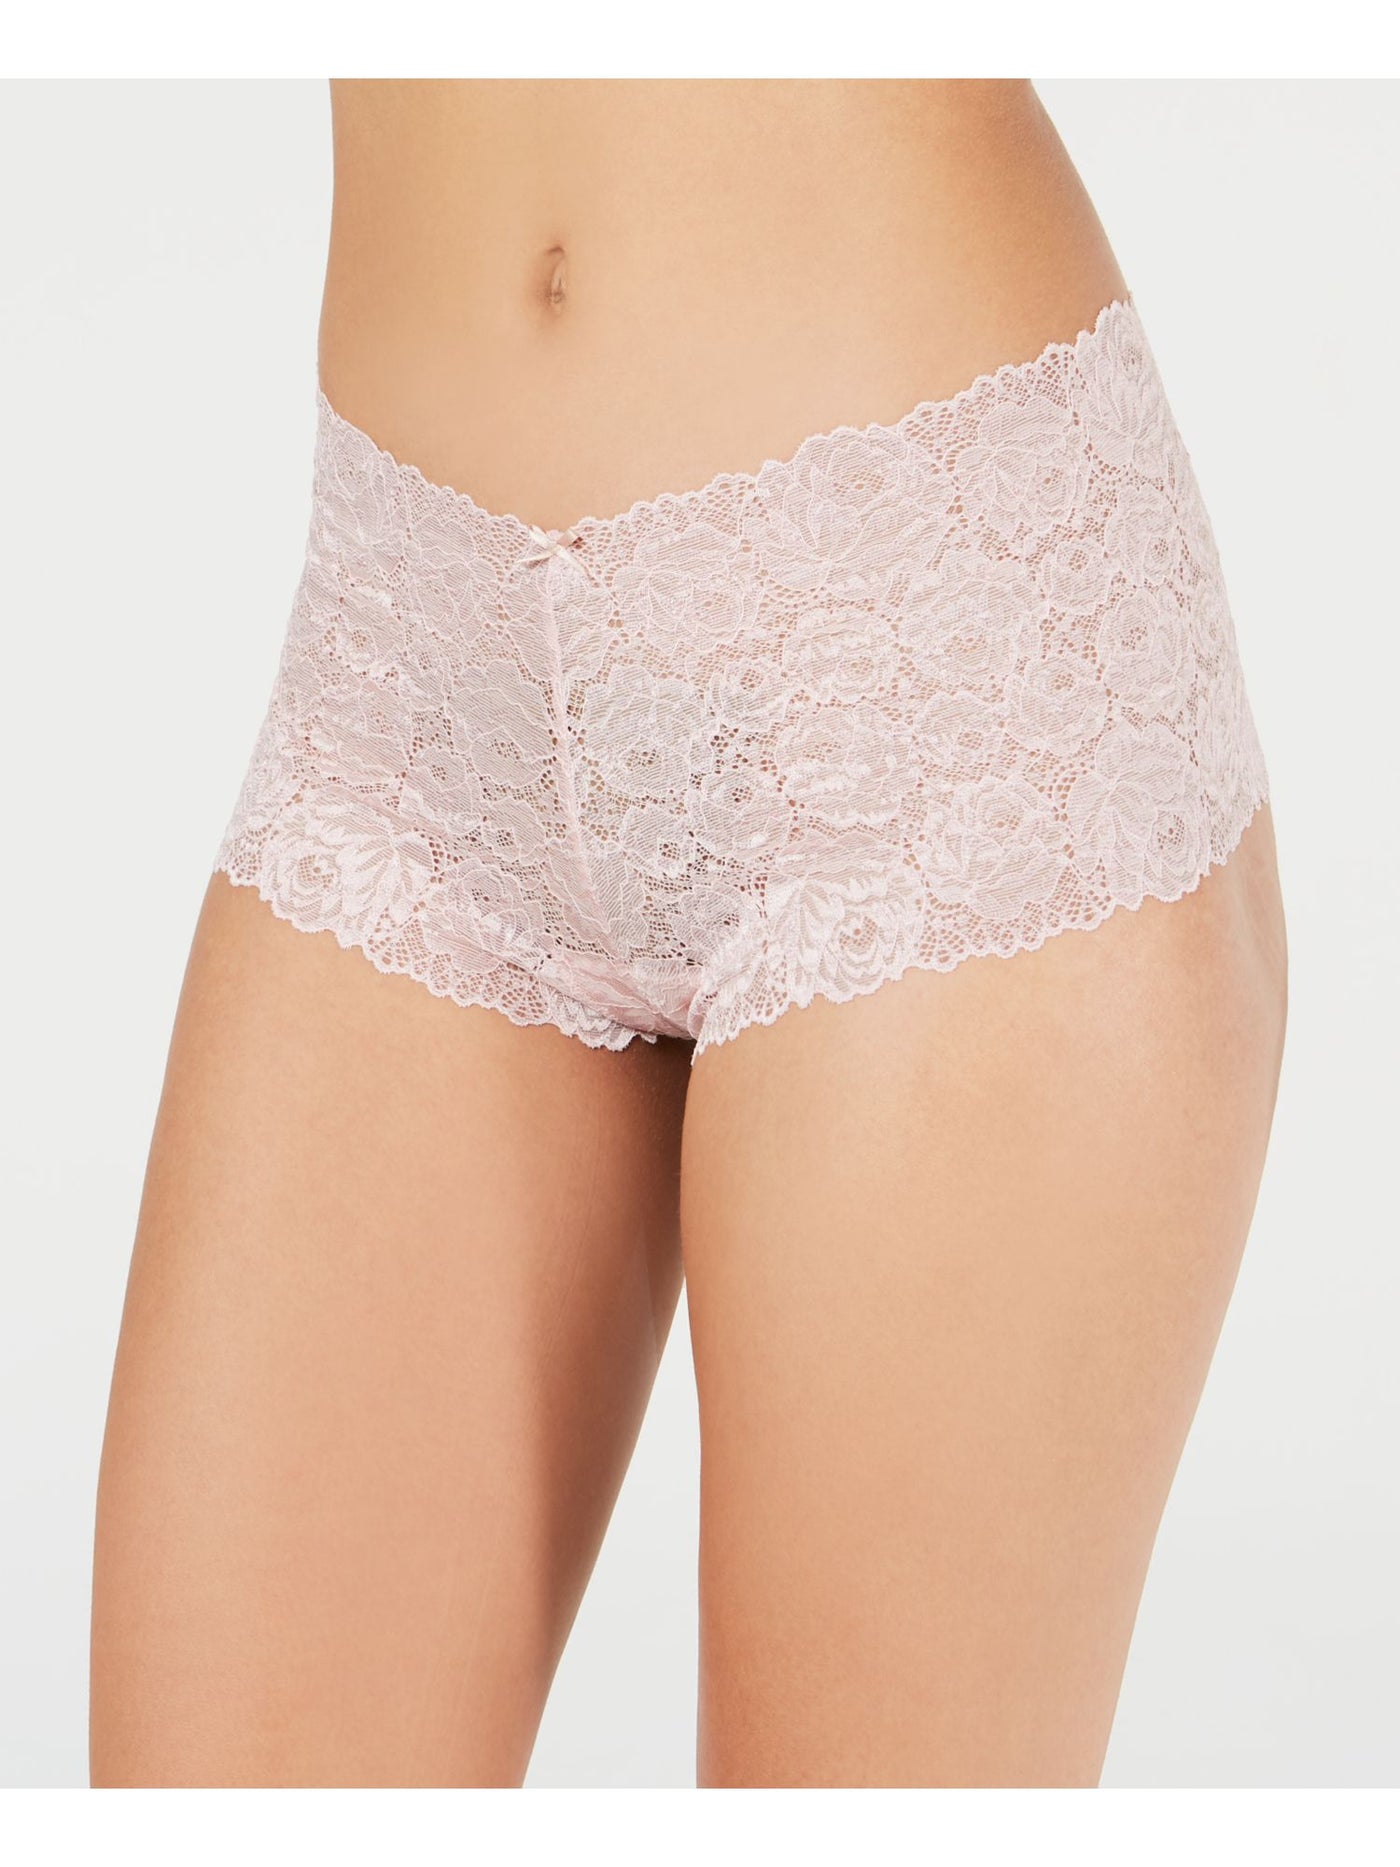 INC Intimates Pink Lace Floral Everyday Boy Short Size: XL